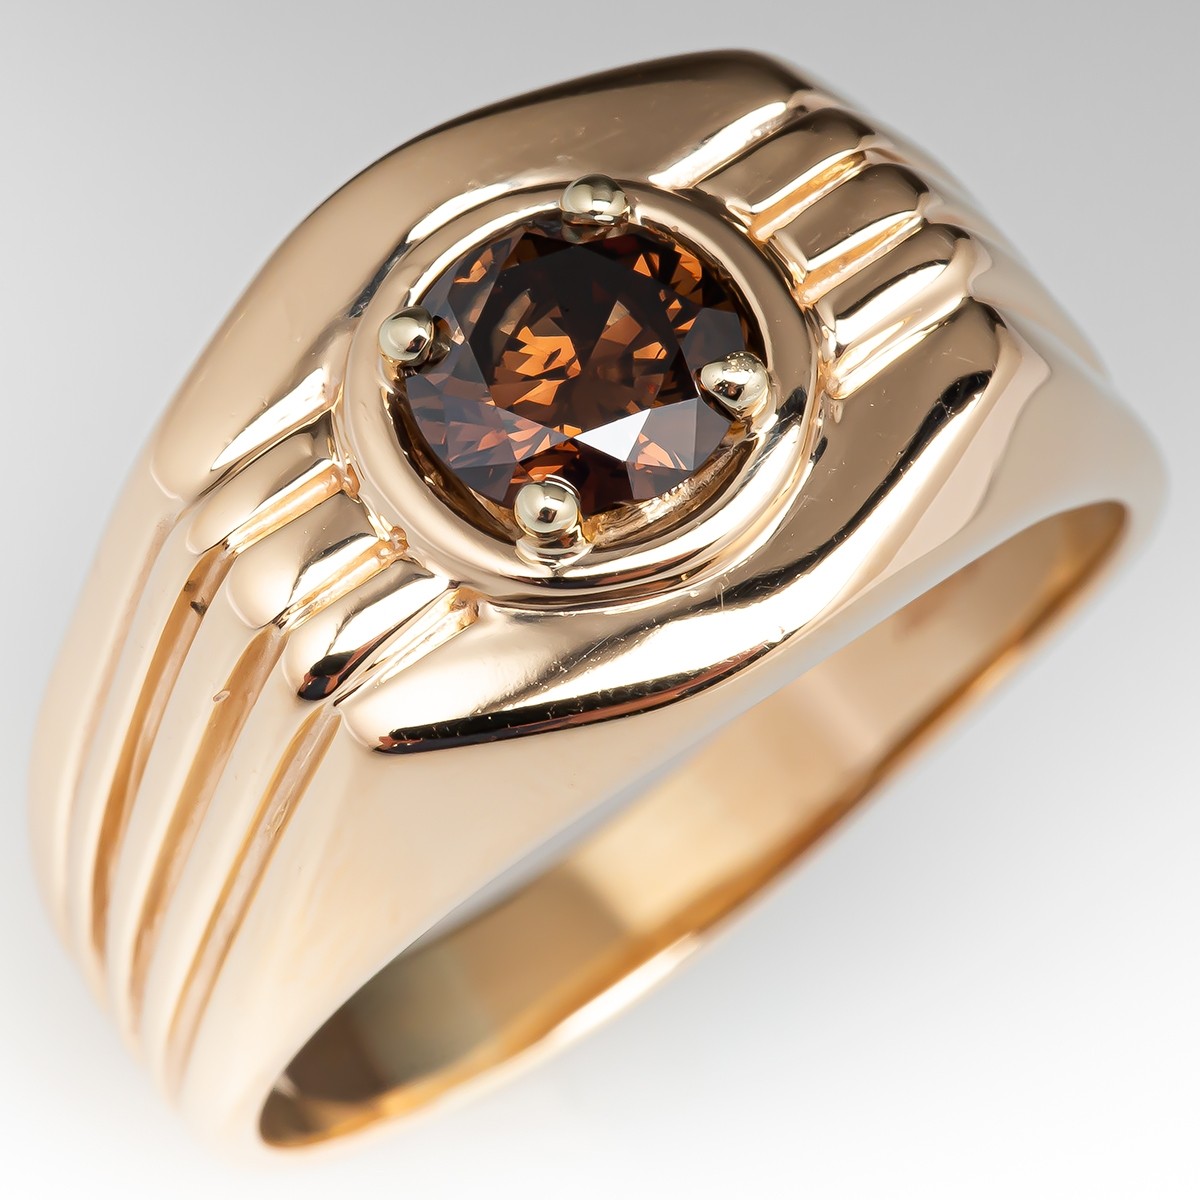 Mens Round Cut Brown Diamond Ring in 14K Yellow Gold